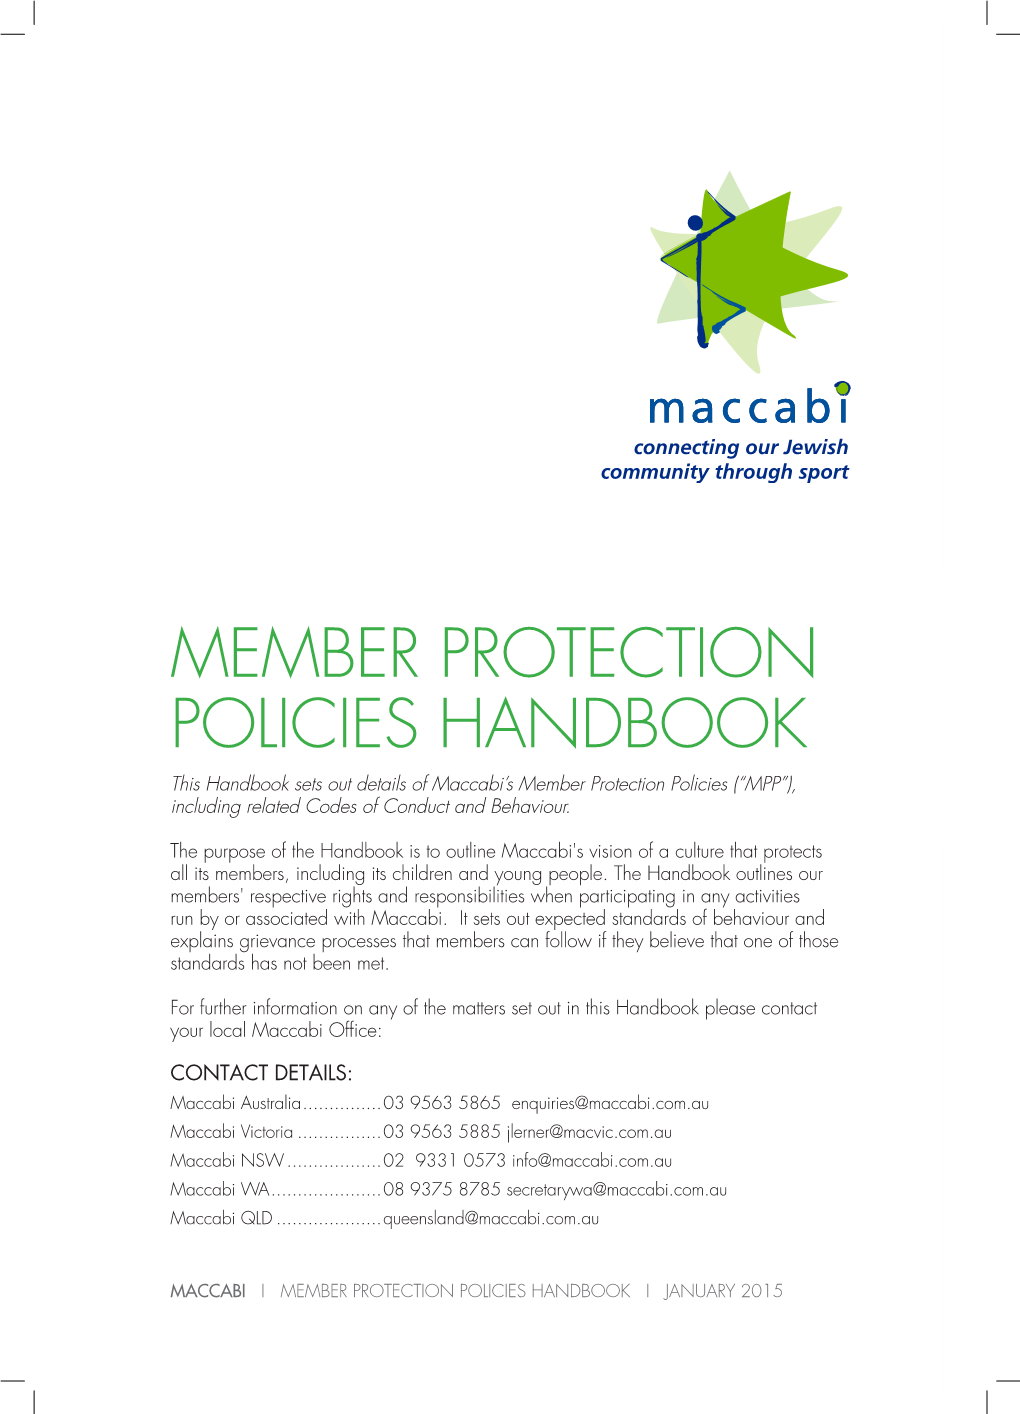 MEMBER PROTECTION POLICIES HANDBOOK This Handbook Sets out Details of Maccabi’S Member Protection Policies (“MPP”), Including Related Codes of Conduct and Behaviour